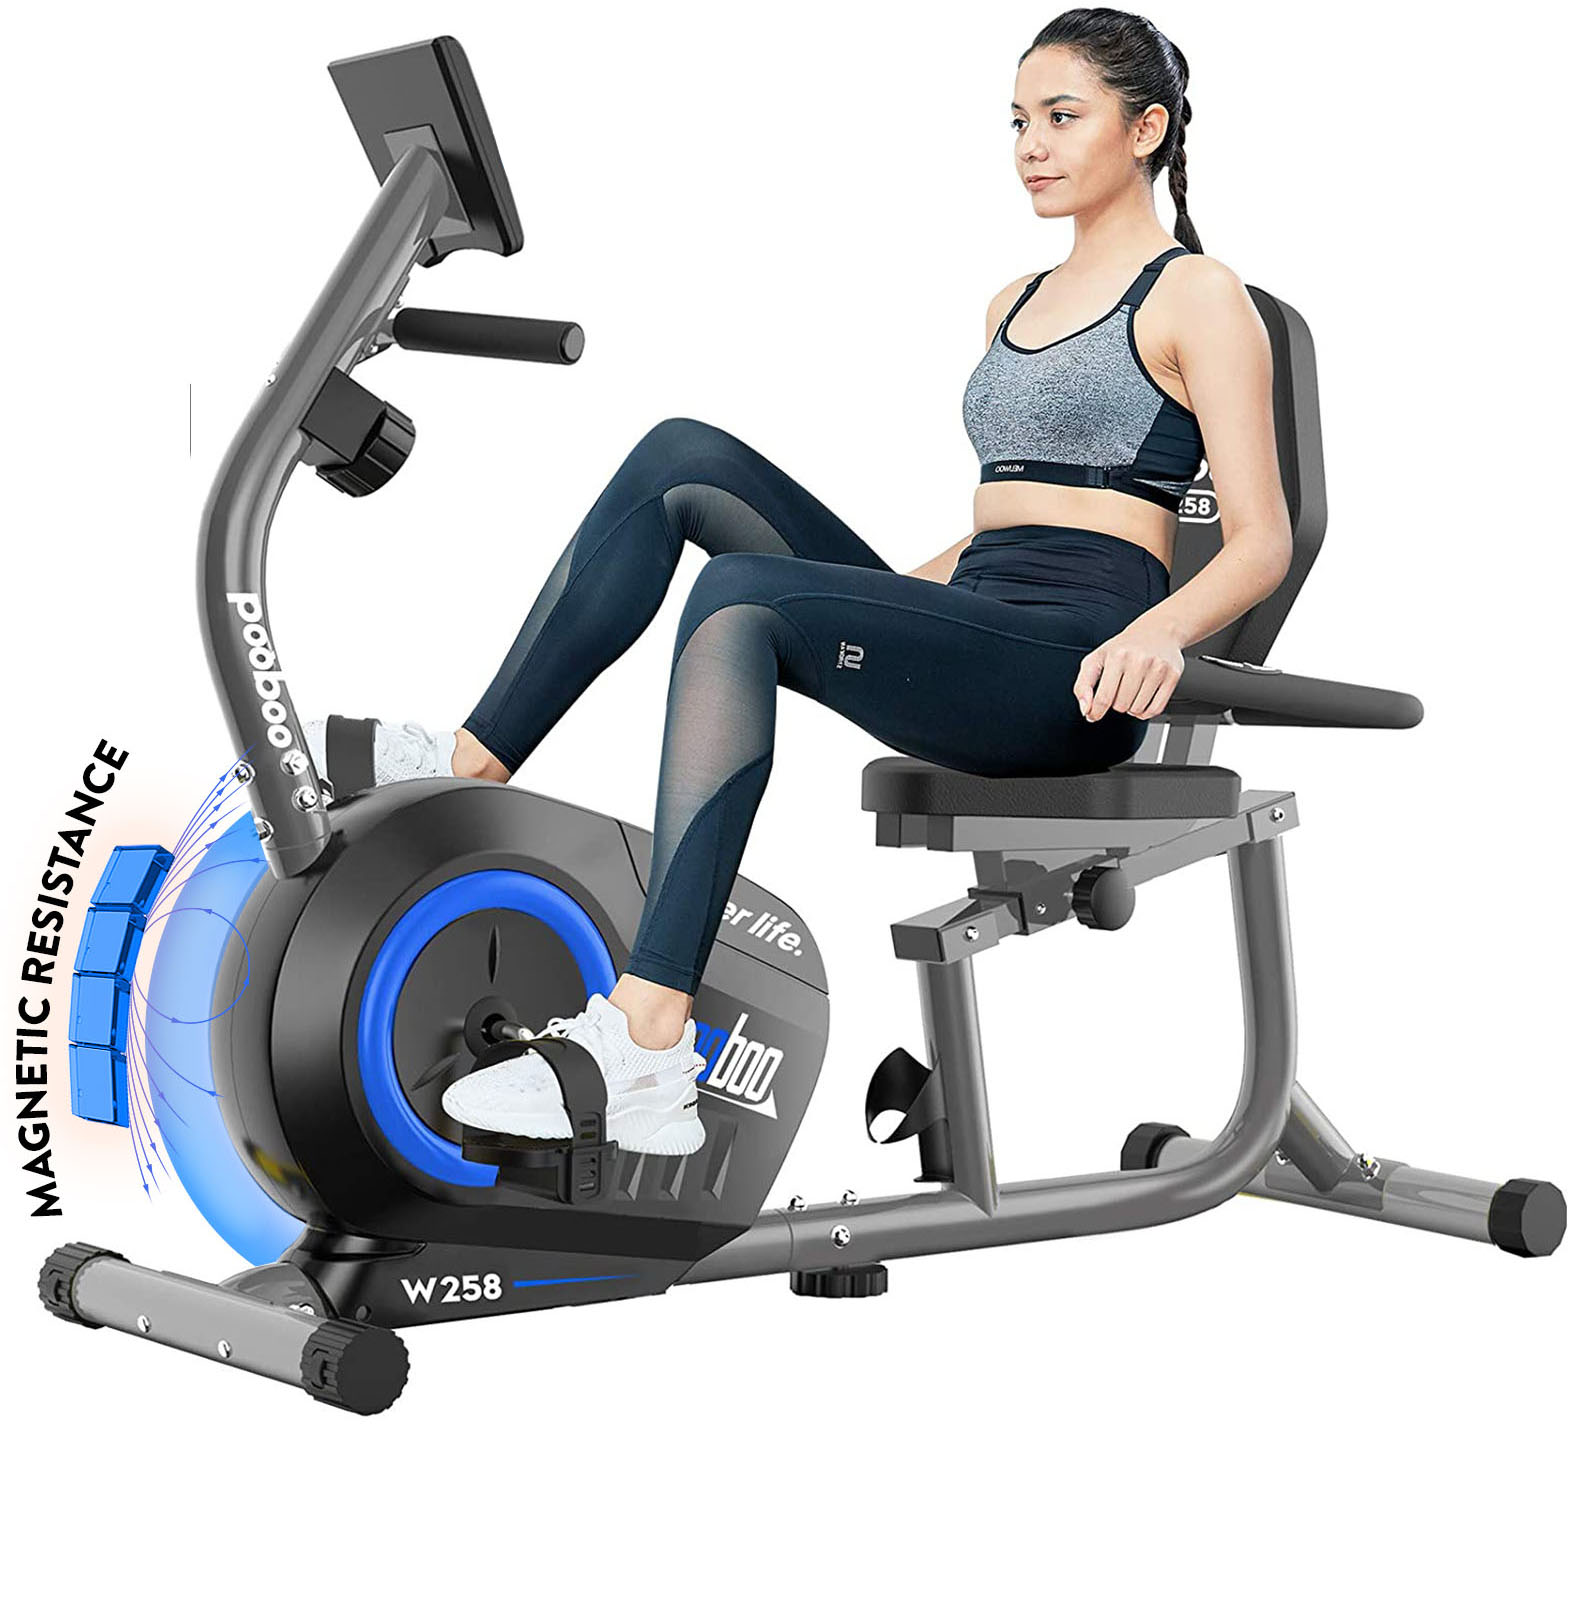 Pooboo Recumbent Exercise Bikes Sit Down Stationary Bicycle Magnetic Resistance Indoor Cycling Bike 380lb - image 1 of 16